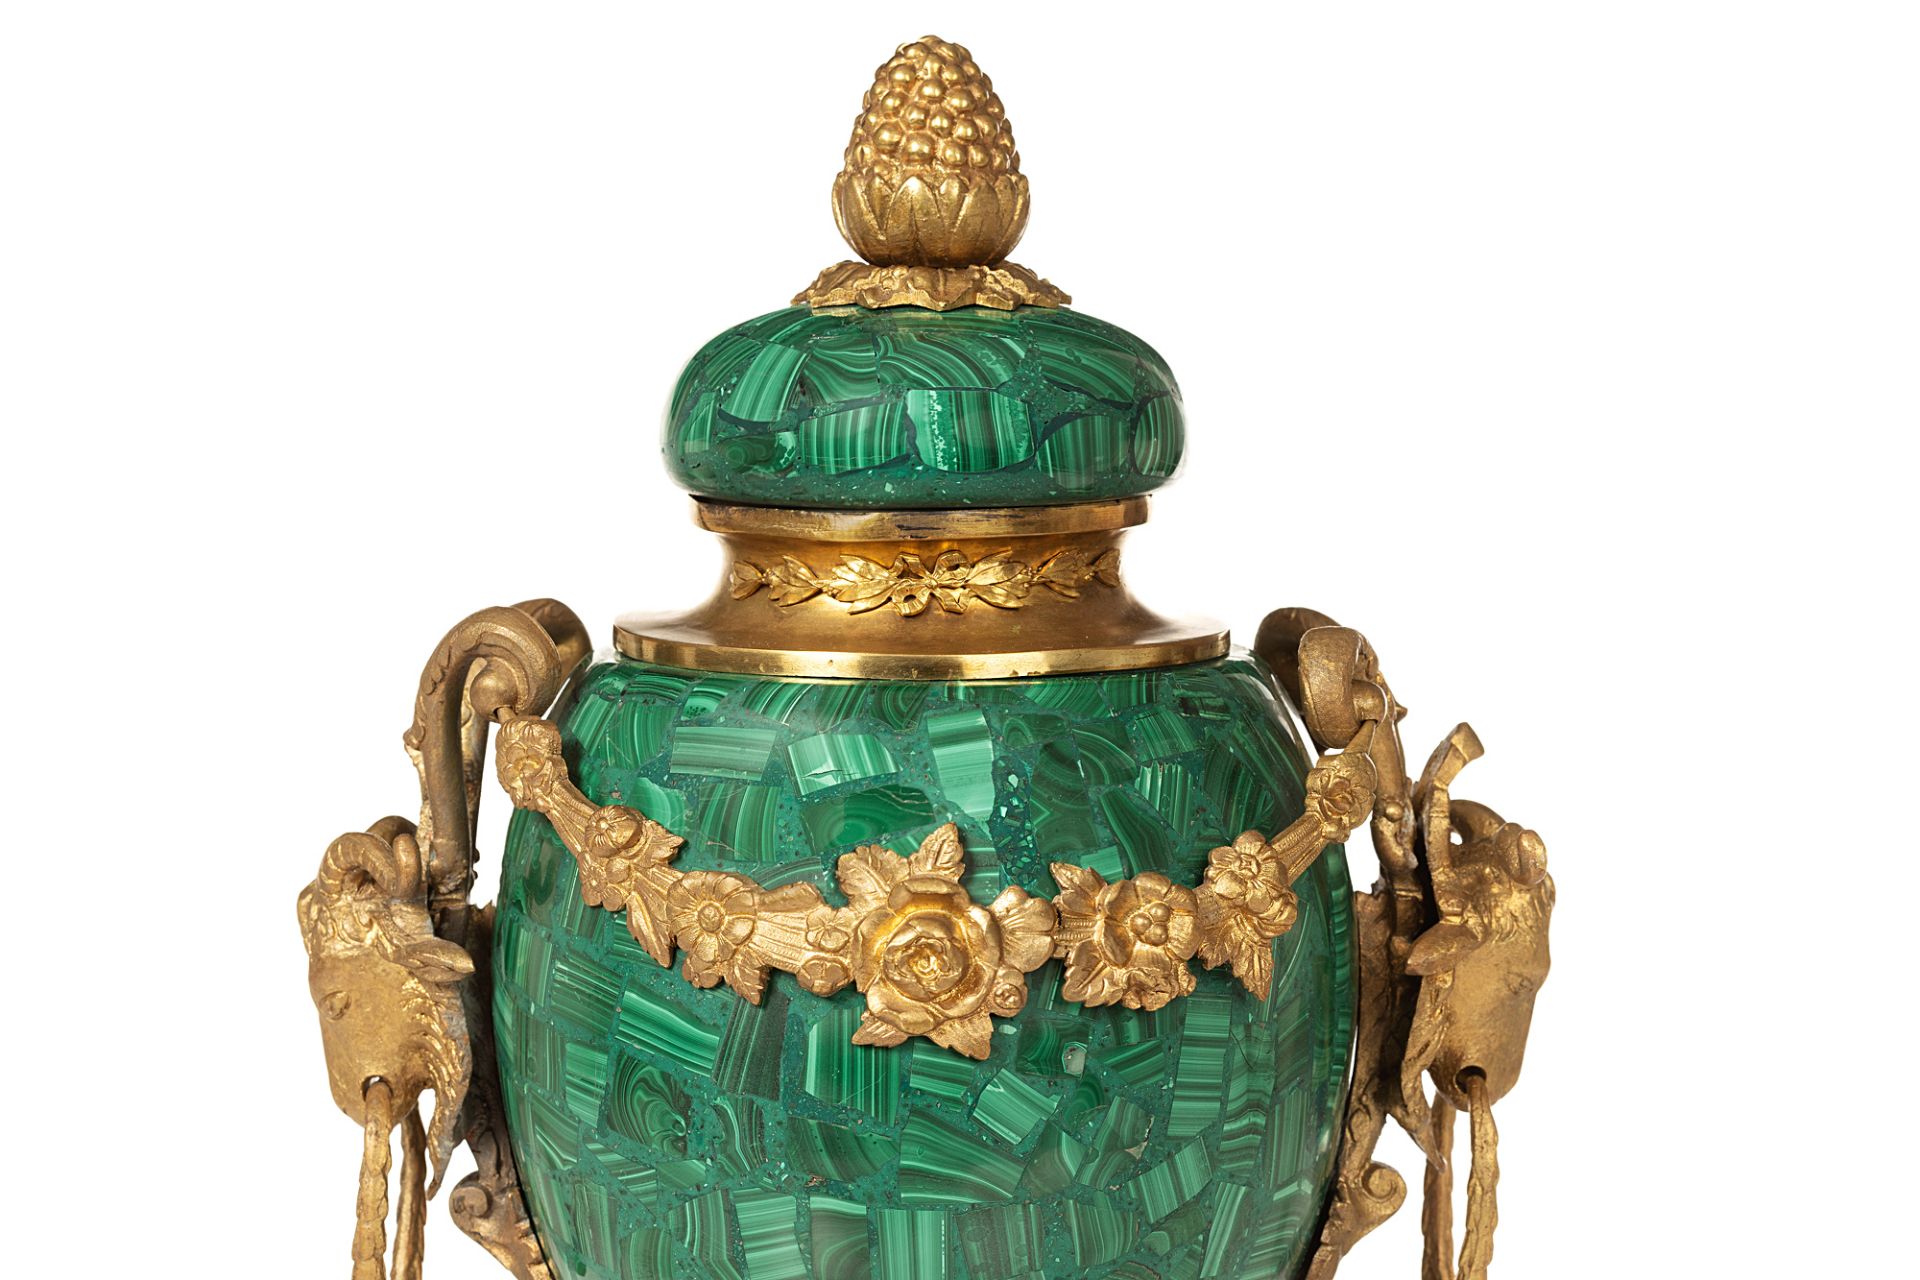 Pair of malachite vases in the style of French Early Classicism - Image 5 of 8